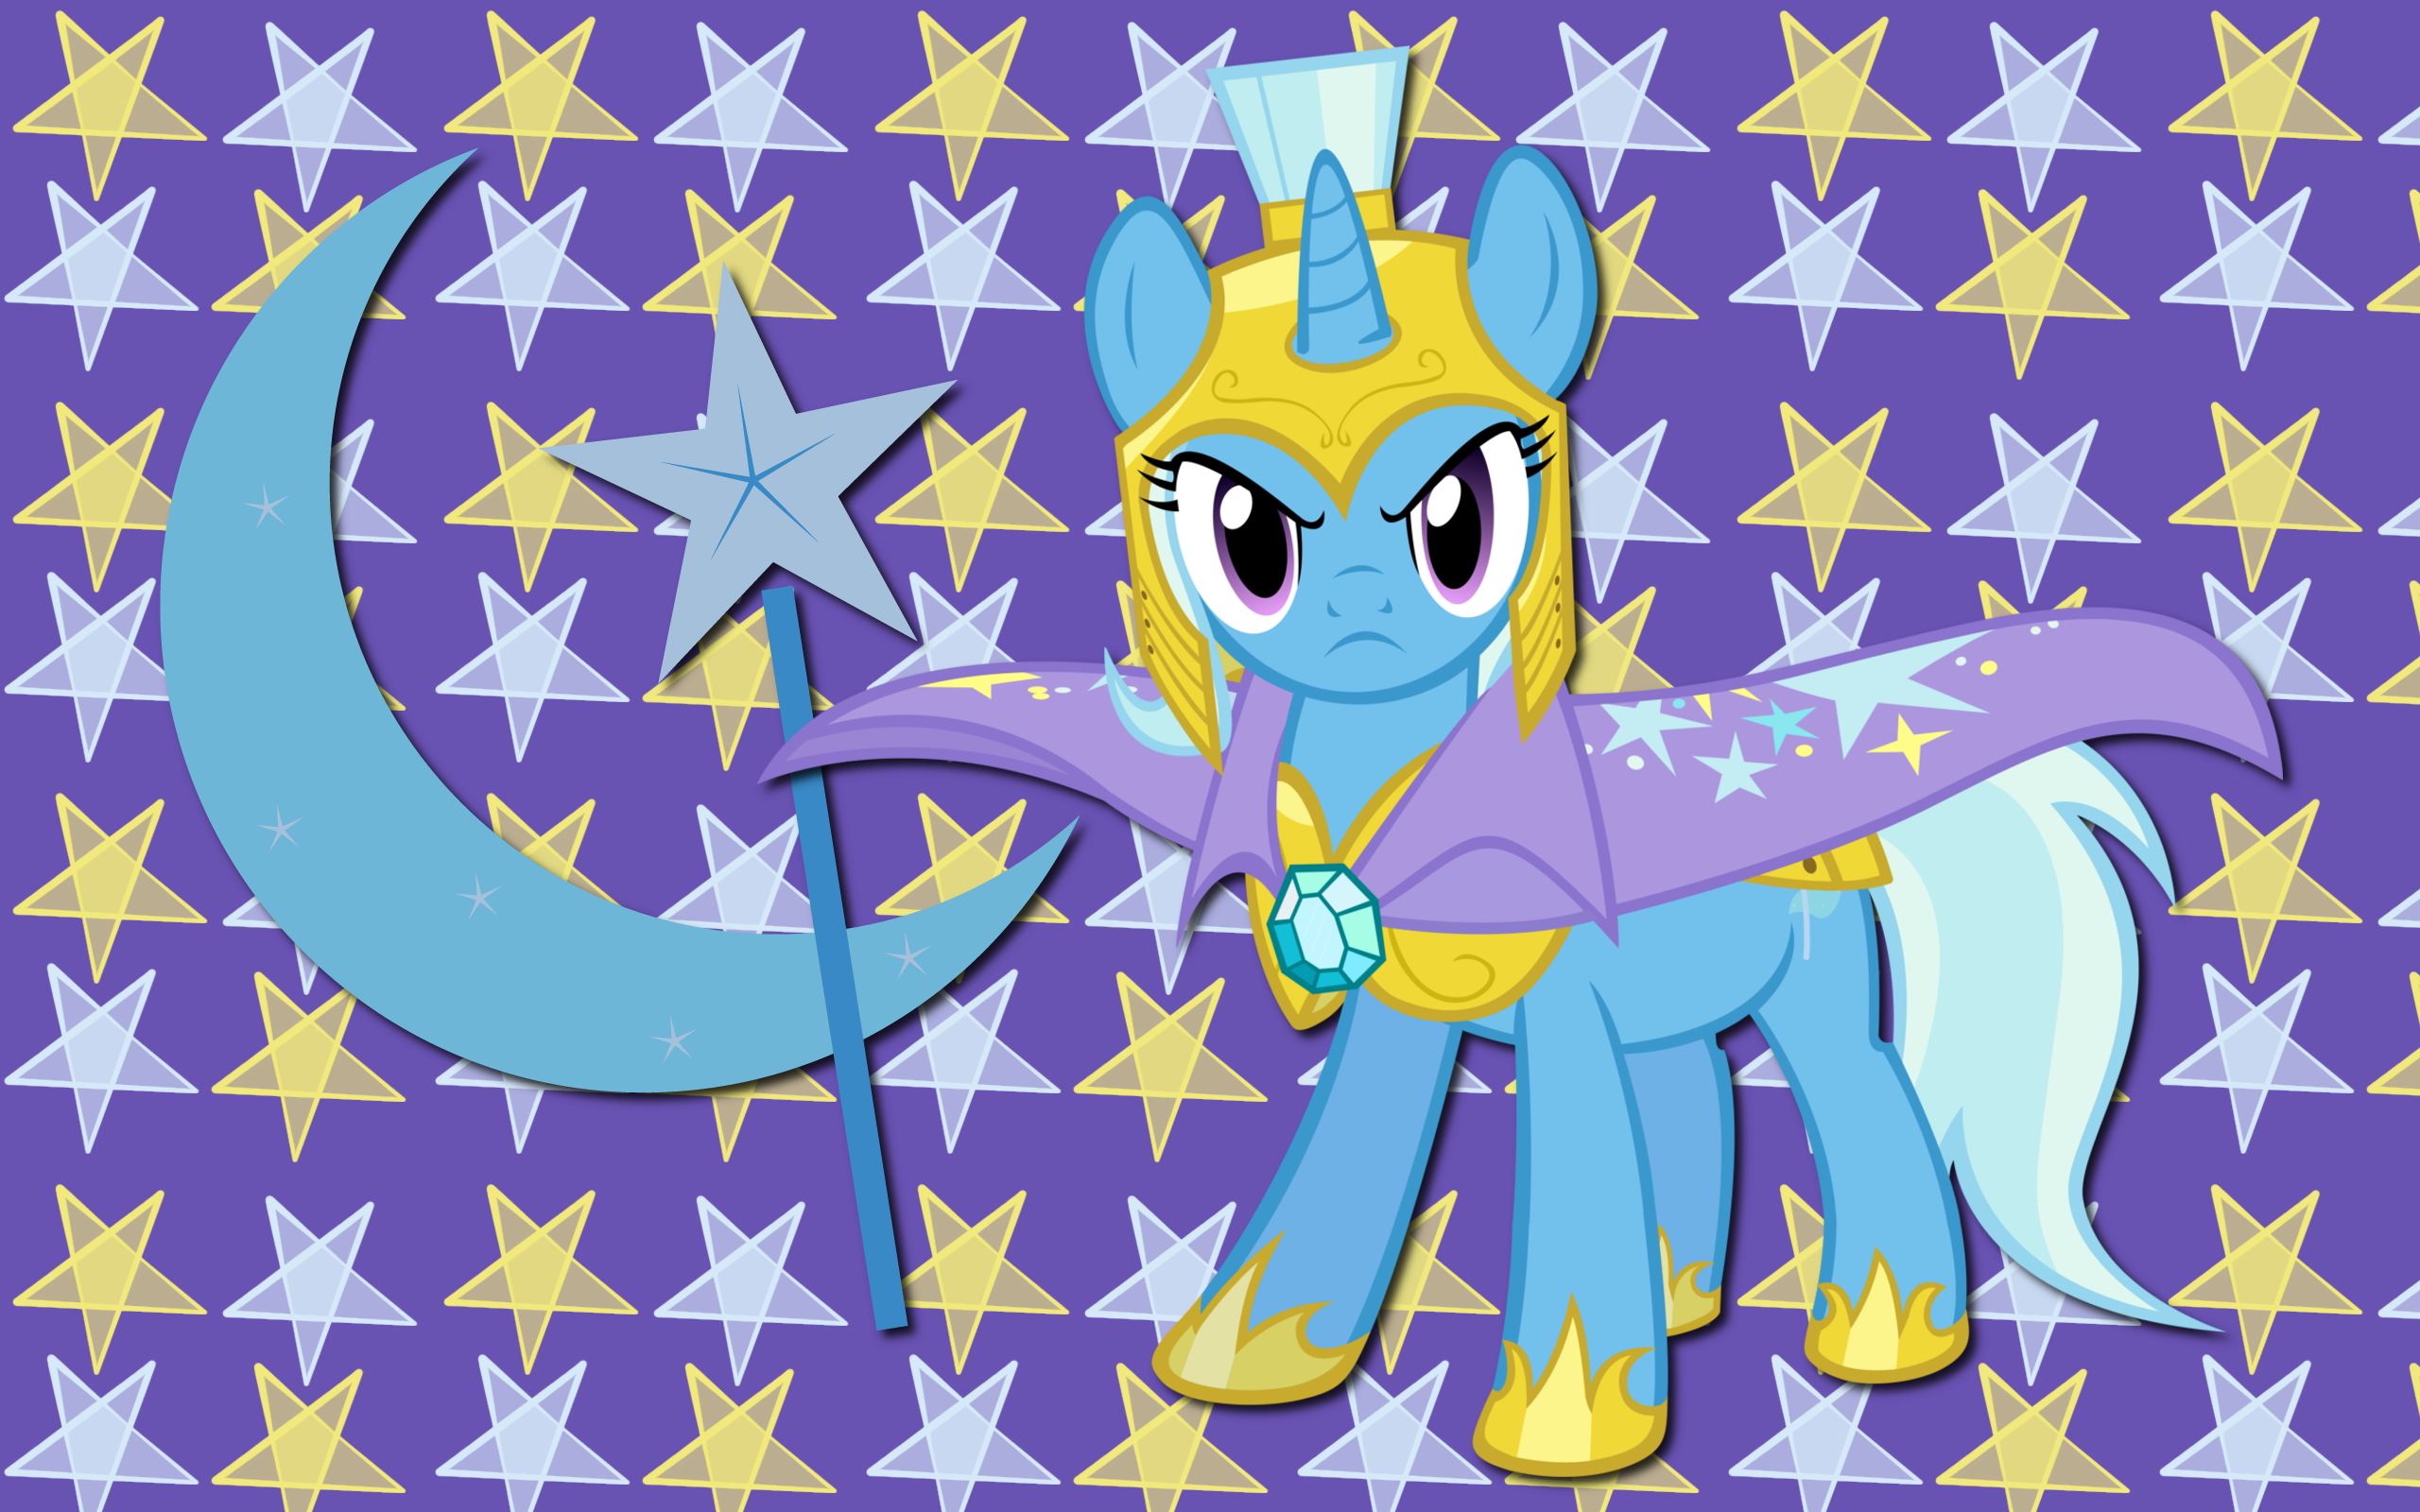 Guard Trixie WP by AliceHumanSacrifice0, ooklah and Spaceponies